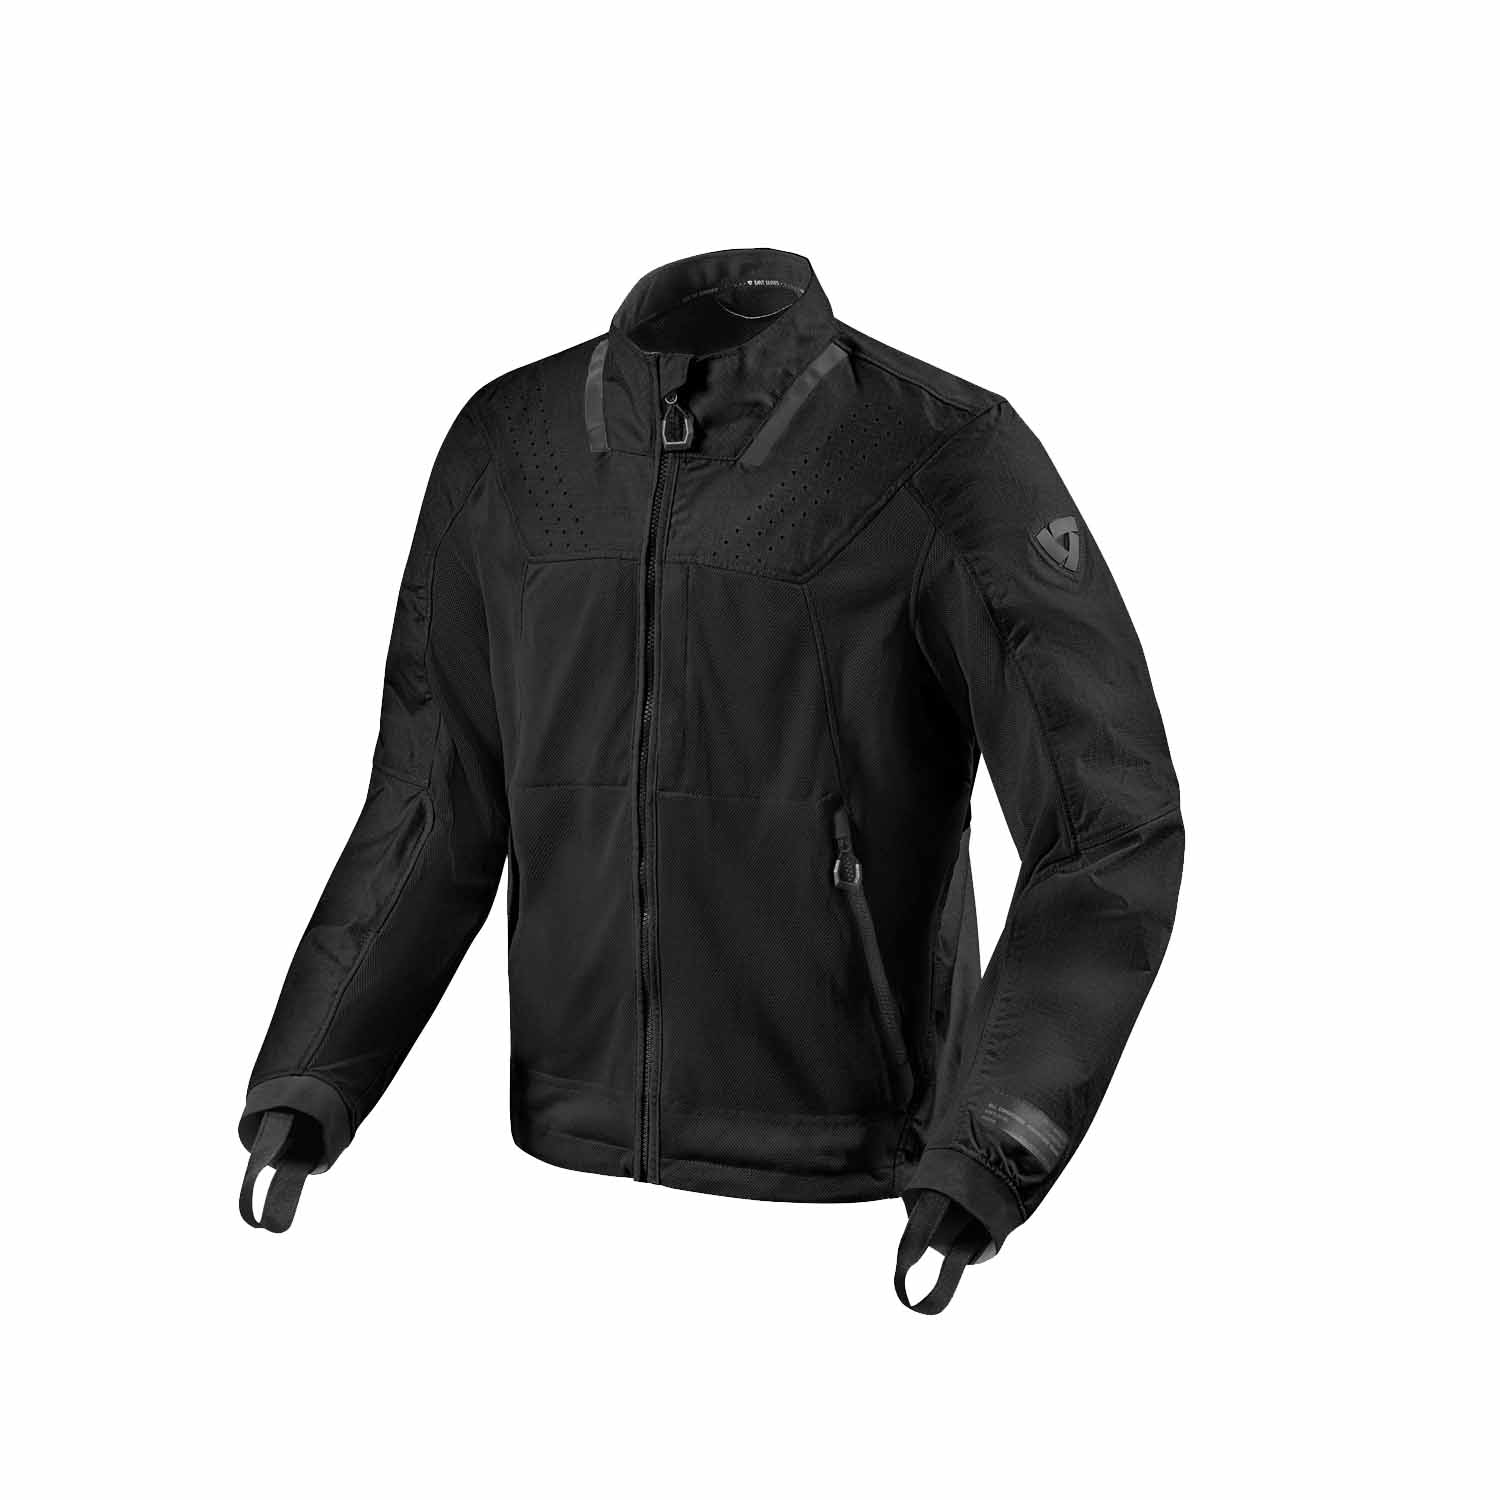 Image of REV'IT! Territory Jacket Black Standard Taille S